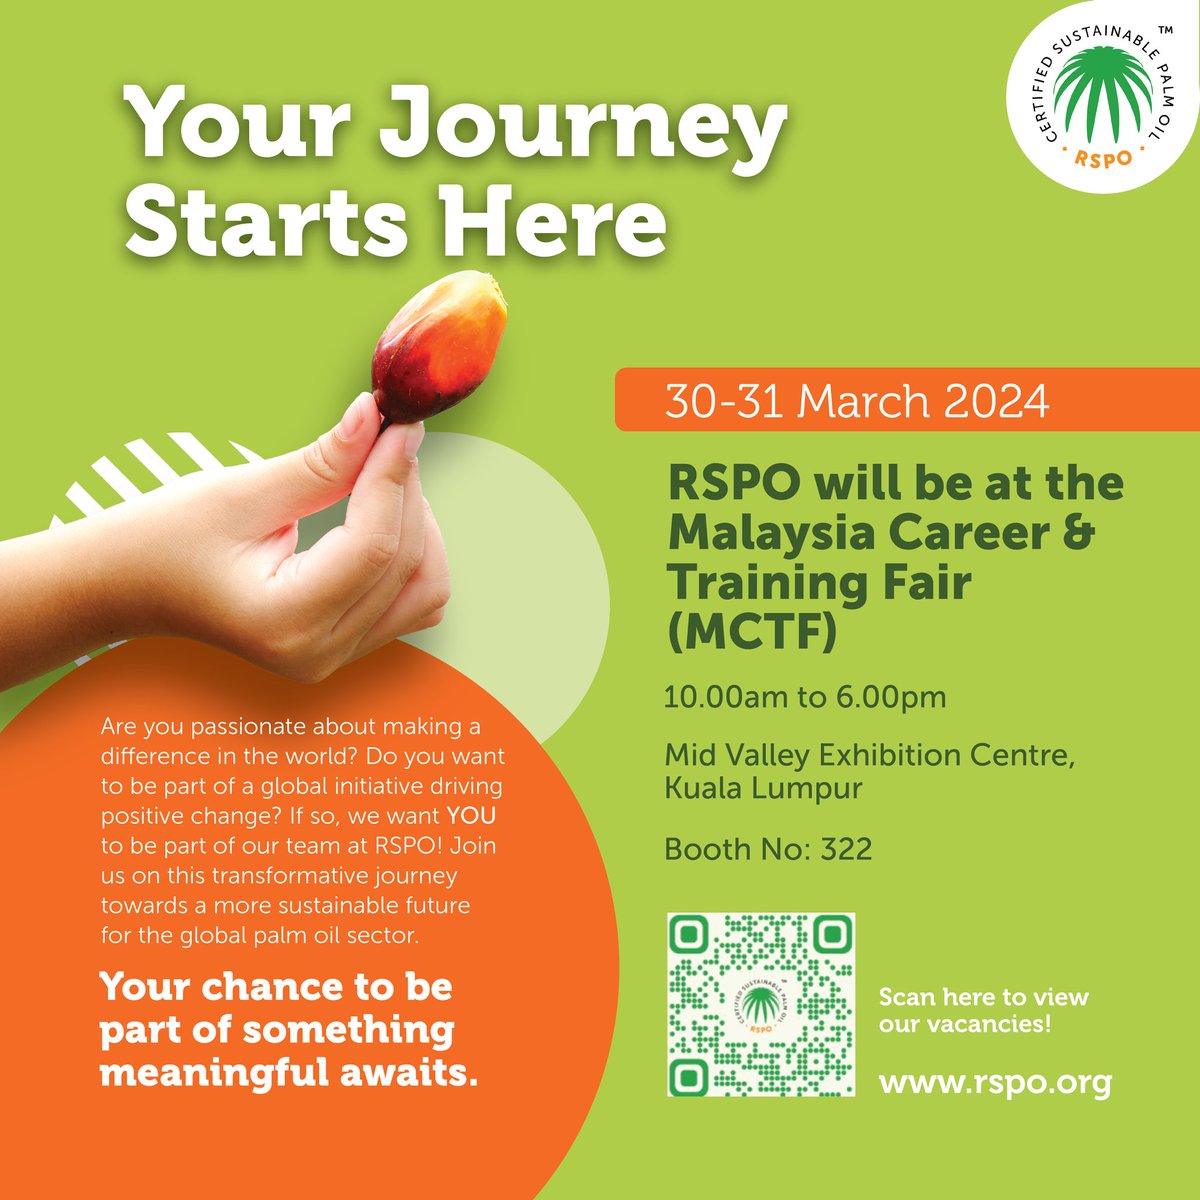 Join us at the Malaysia Career & Training Fair (MCTF) this weekend!  📆 30 - 31 March, 2024 ⏰10 AM - 6 PM 📍Mid Valley Exhibition Centre, KL (Booth 322) We can't wait to welcome you and share our vision for a sustainable tomorrow. See you there! 👋